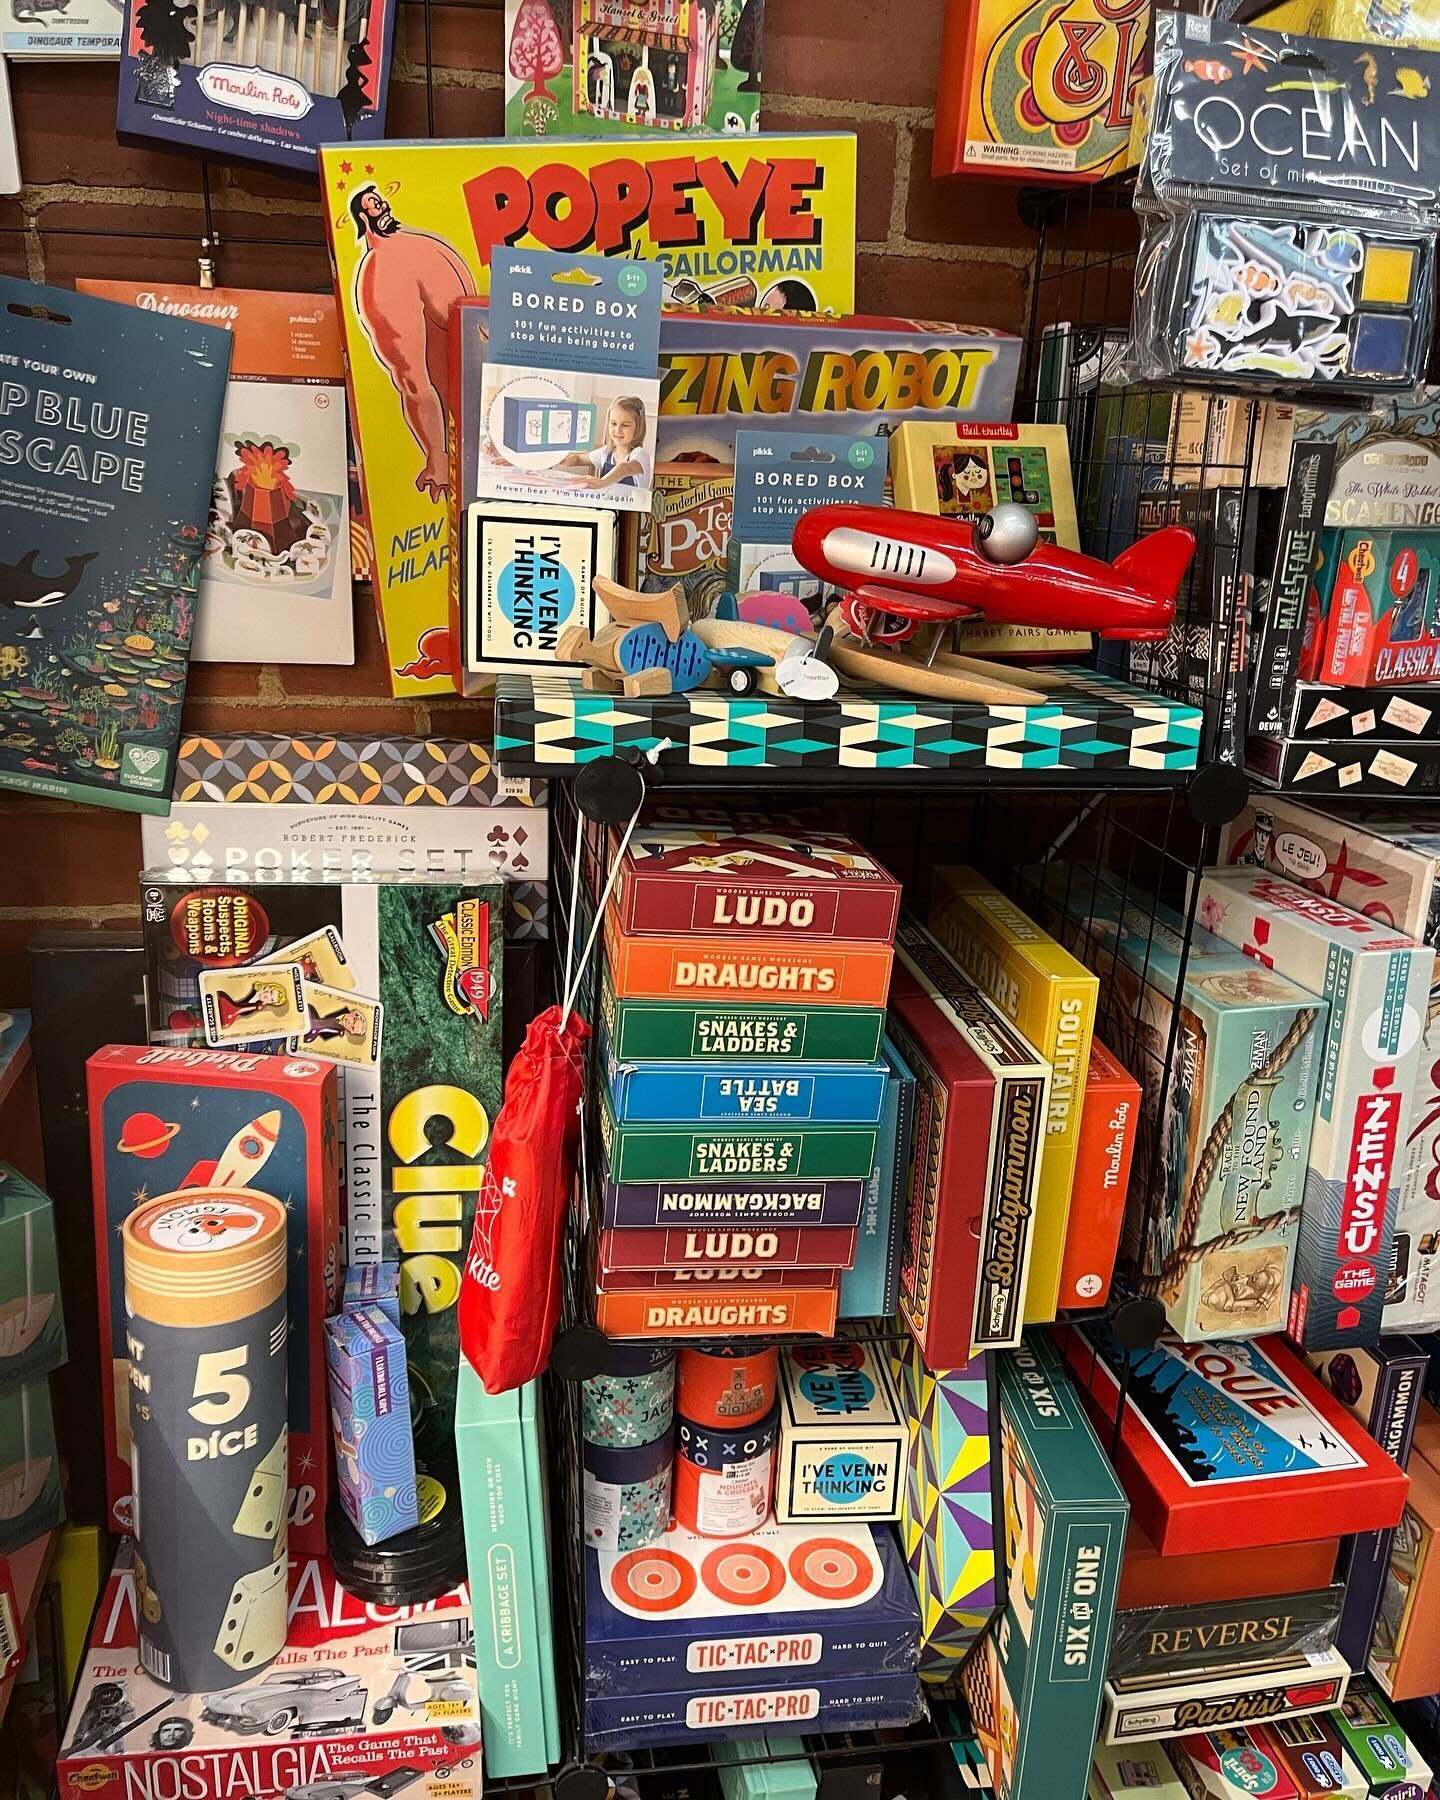 🎄✨ Dreaming of a classic Christmas filled with laughter, strategy, and good old-fashioned fun? Look no further than The Vintage Toy Box, nestled within the treasure trove of delights at Dirty Janes Canberra! 🎁🎲

Picture this: gathered around the t